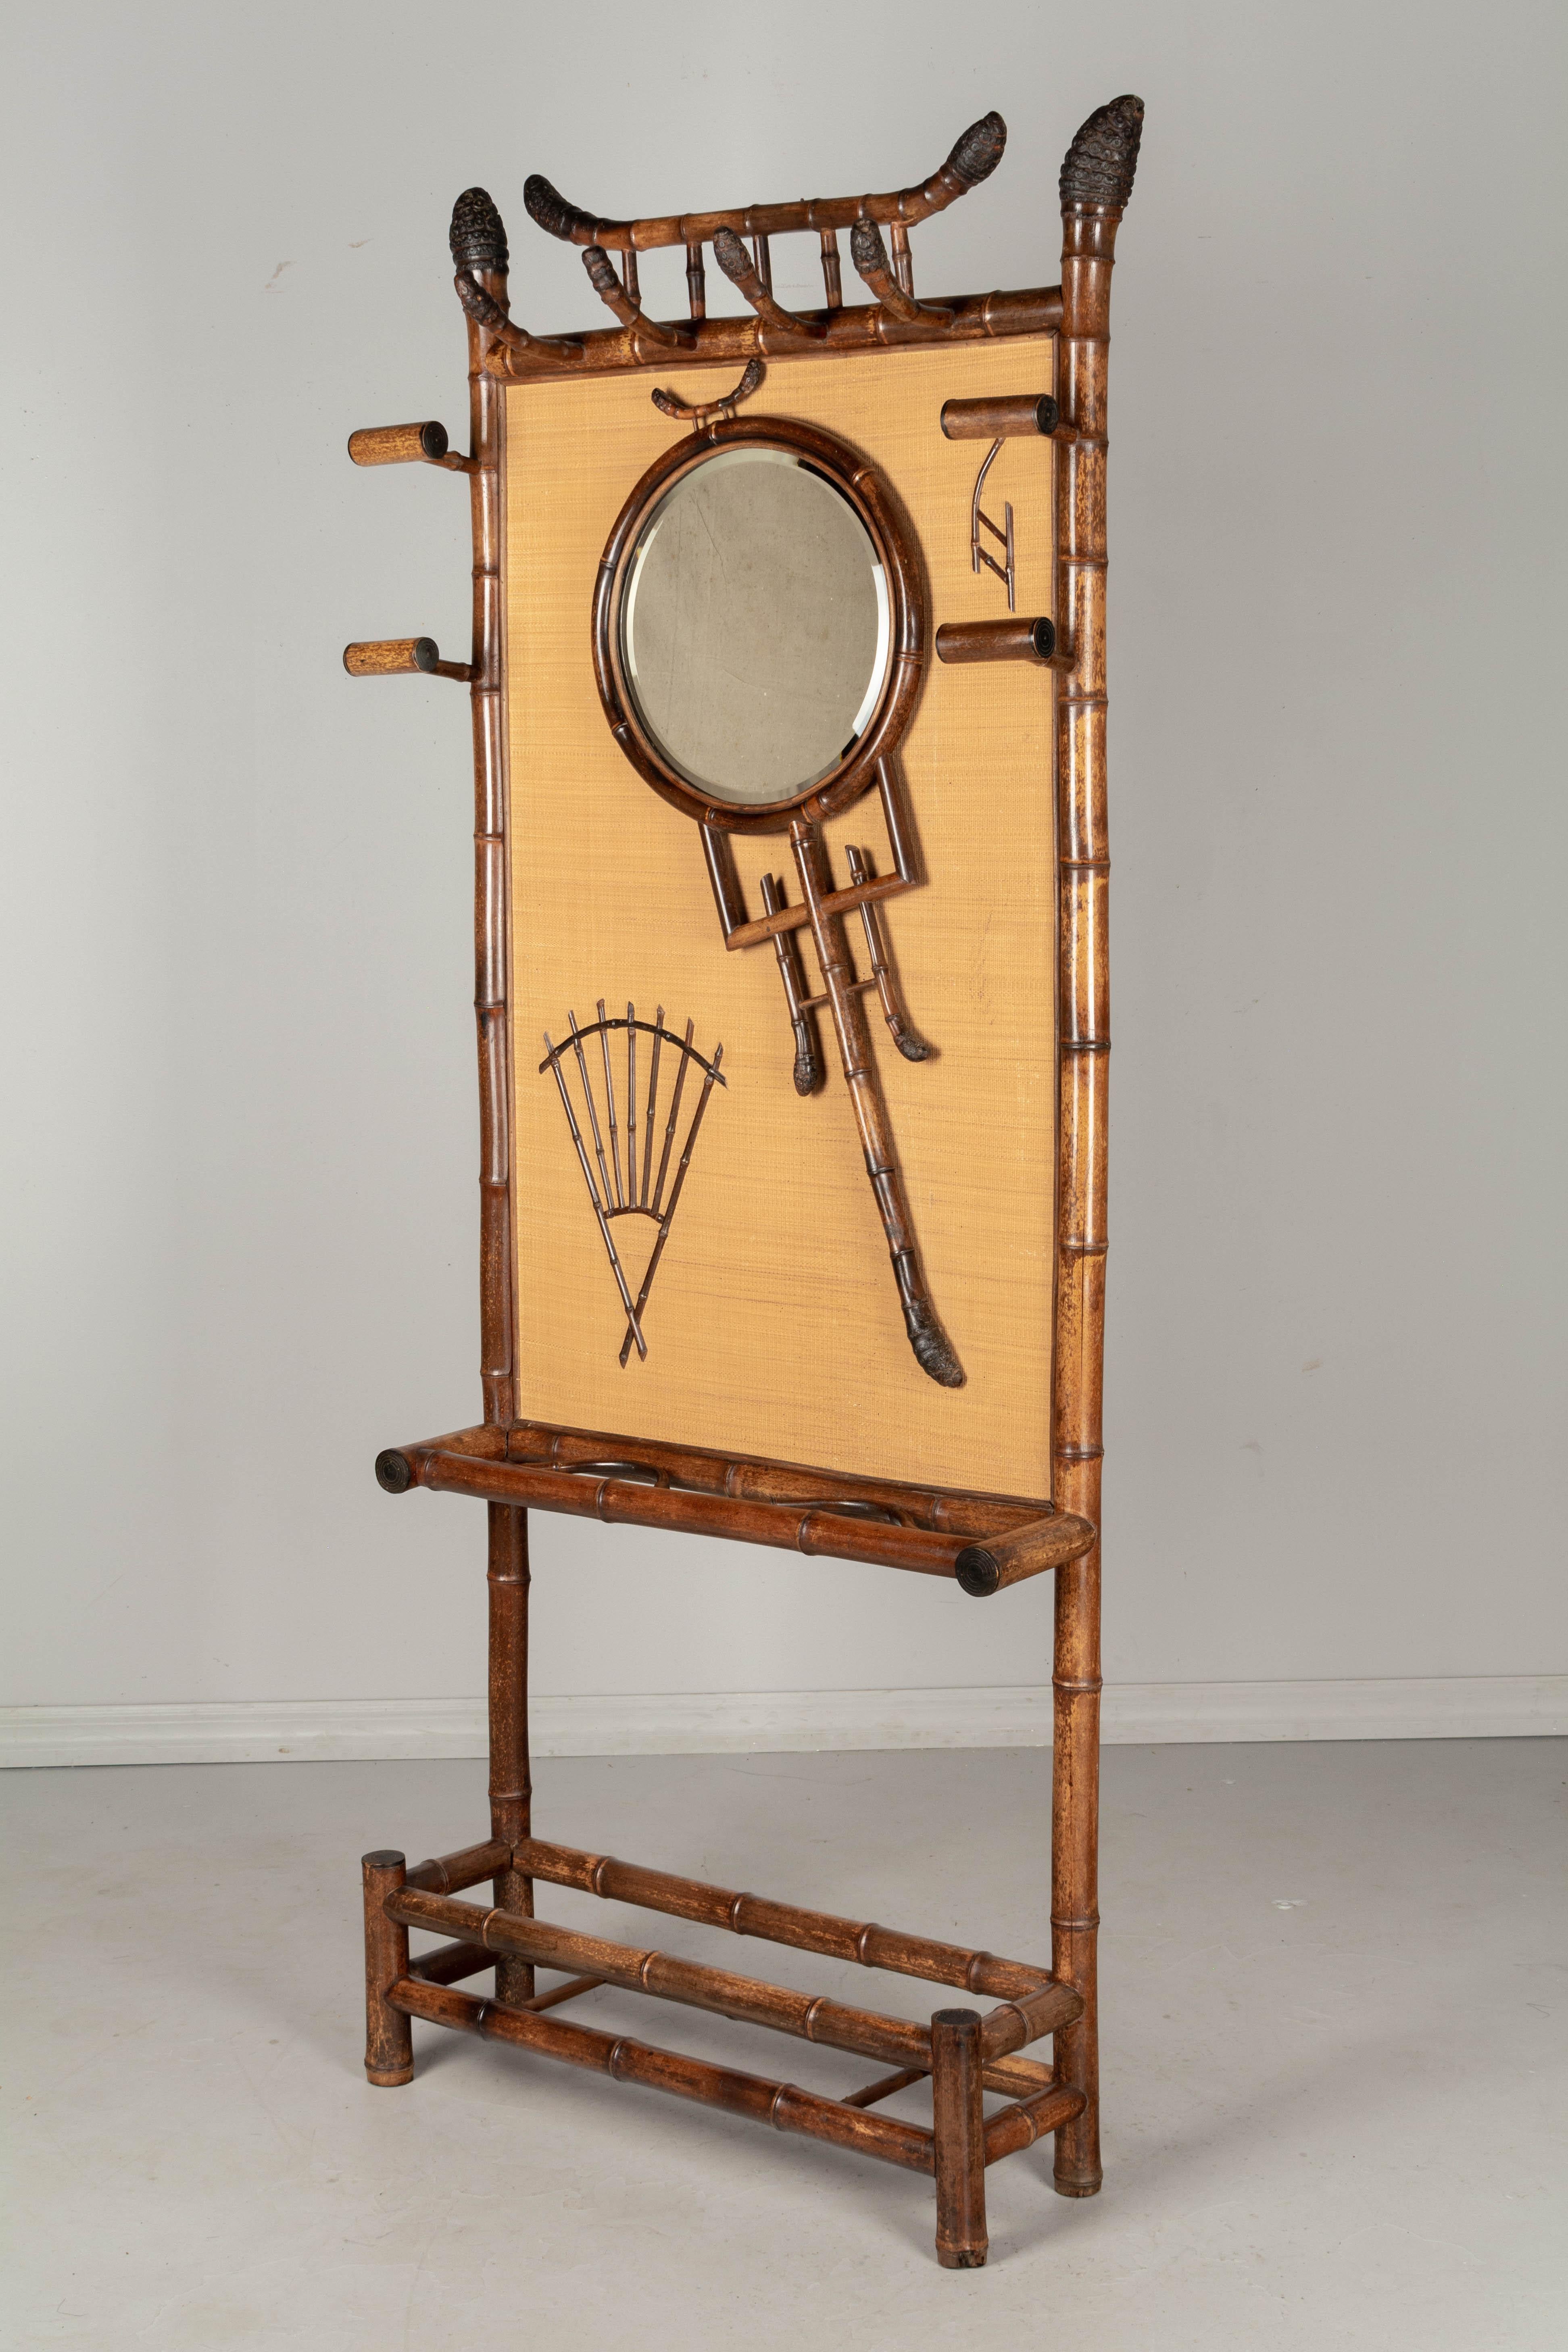 A 19th century French bamboo hall tree, or coat rack, of Japonisme design, with a circular beveled mirror and decorative elements attached to a woven back panel. Four hooks at the top are made from the root end of the bamboo shoot, as are the